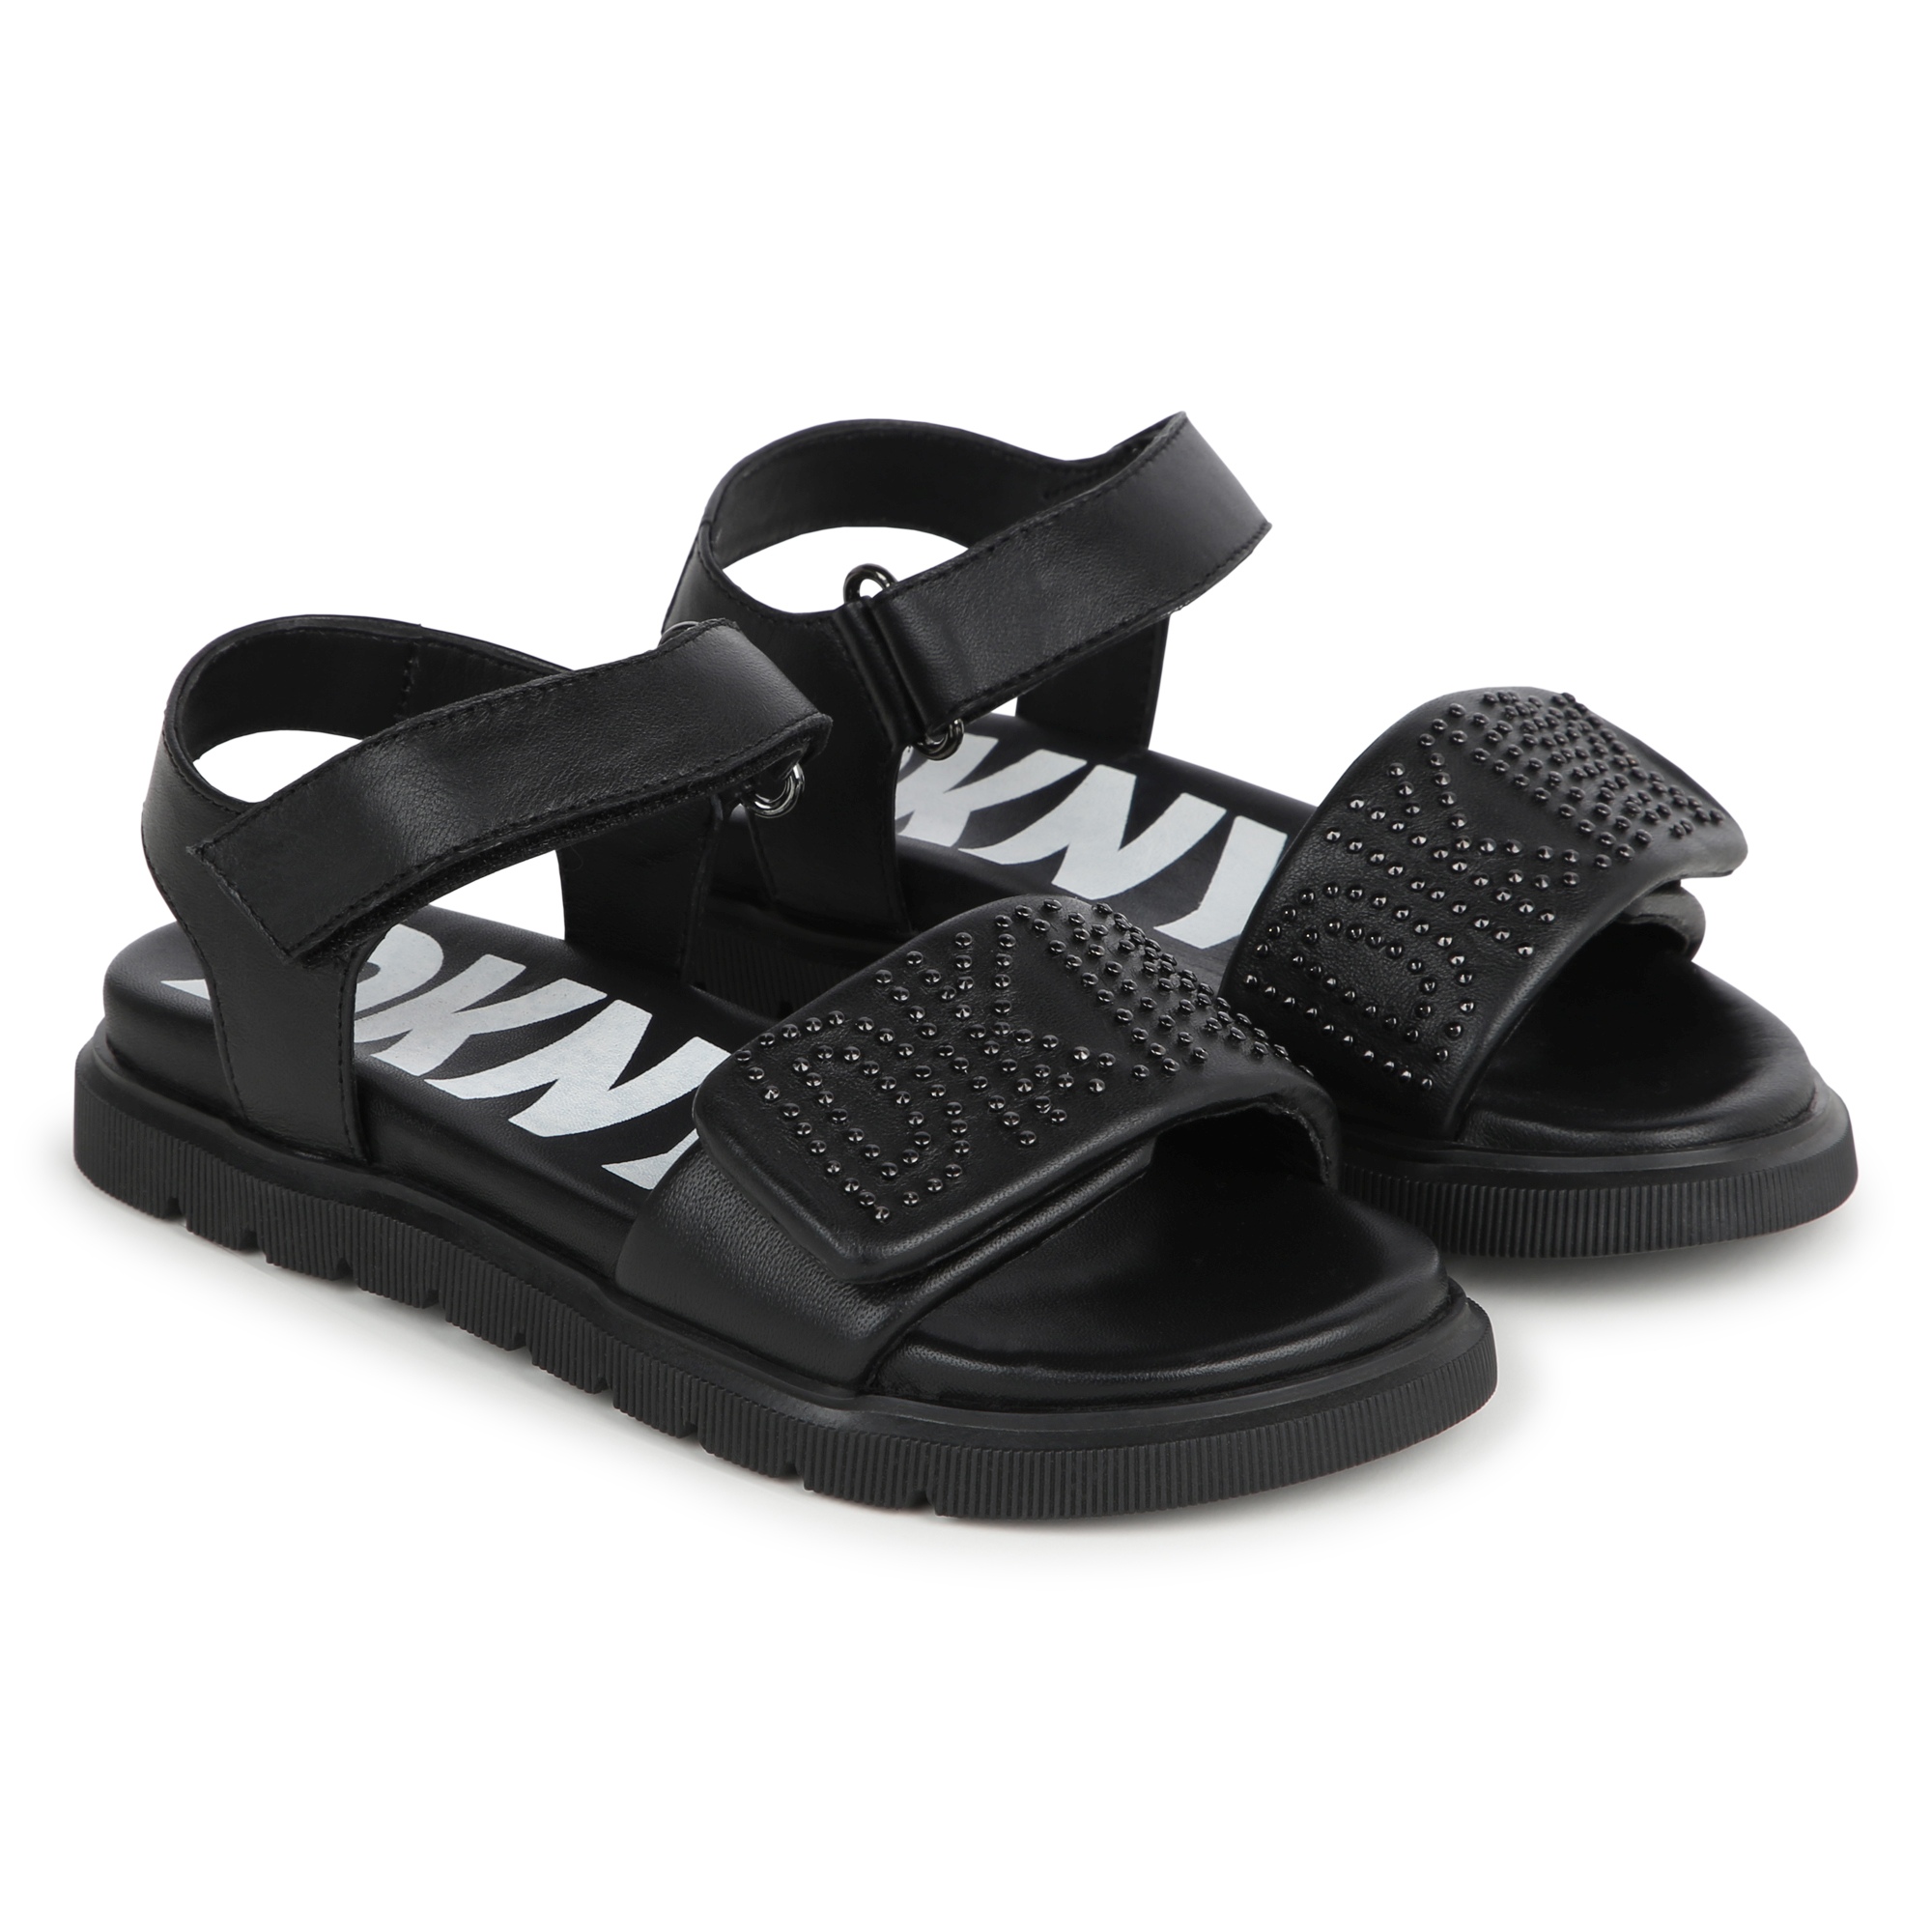 Hook-and-loop leather sandals DKNY for GIRL